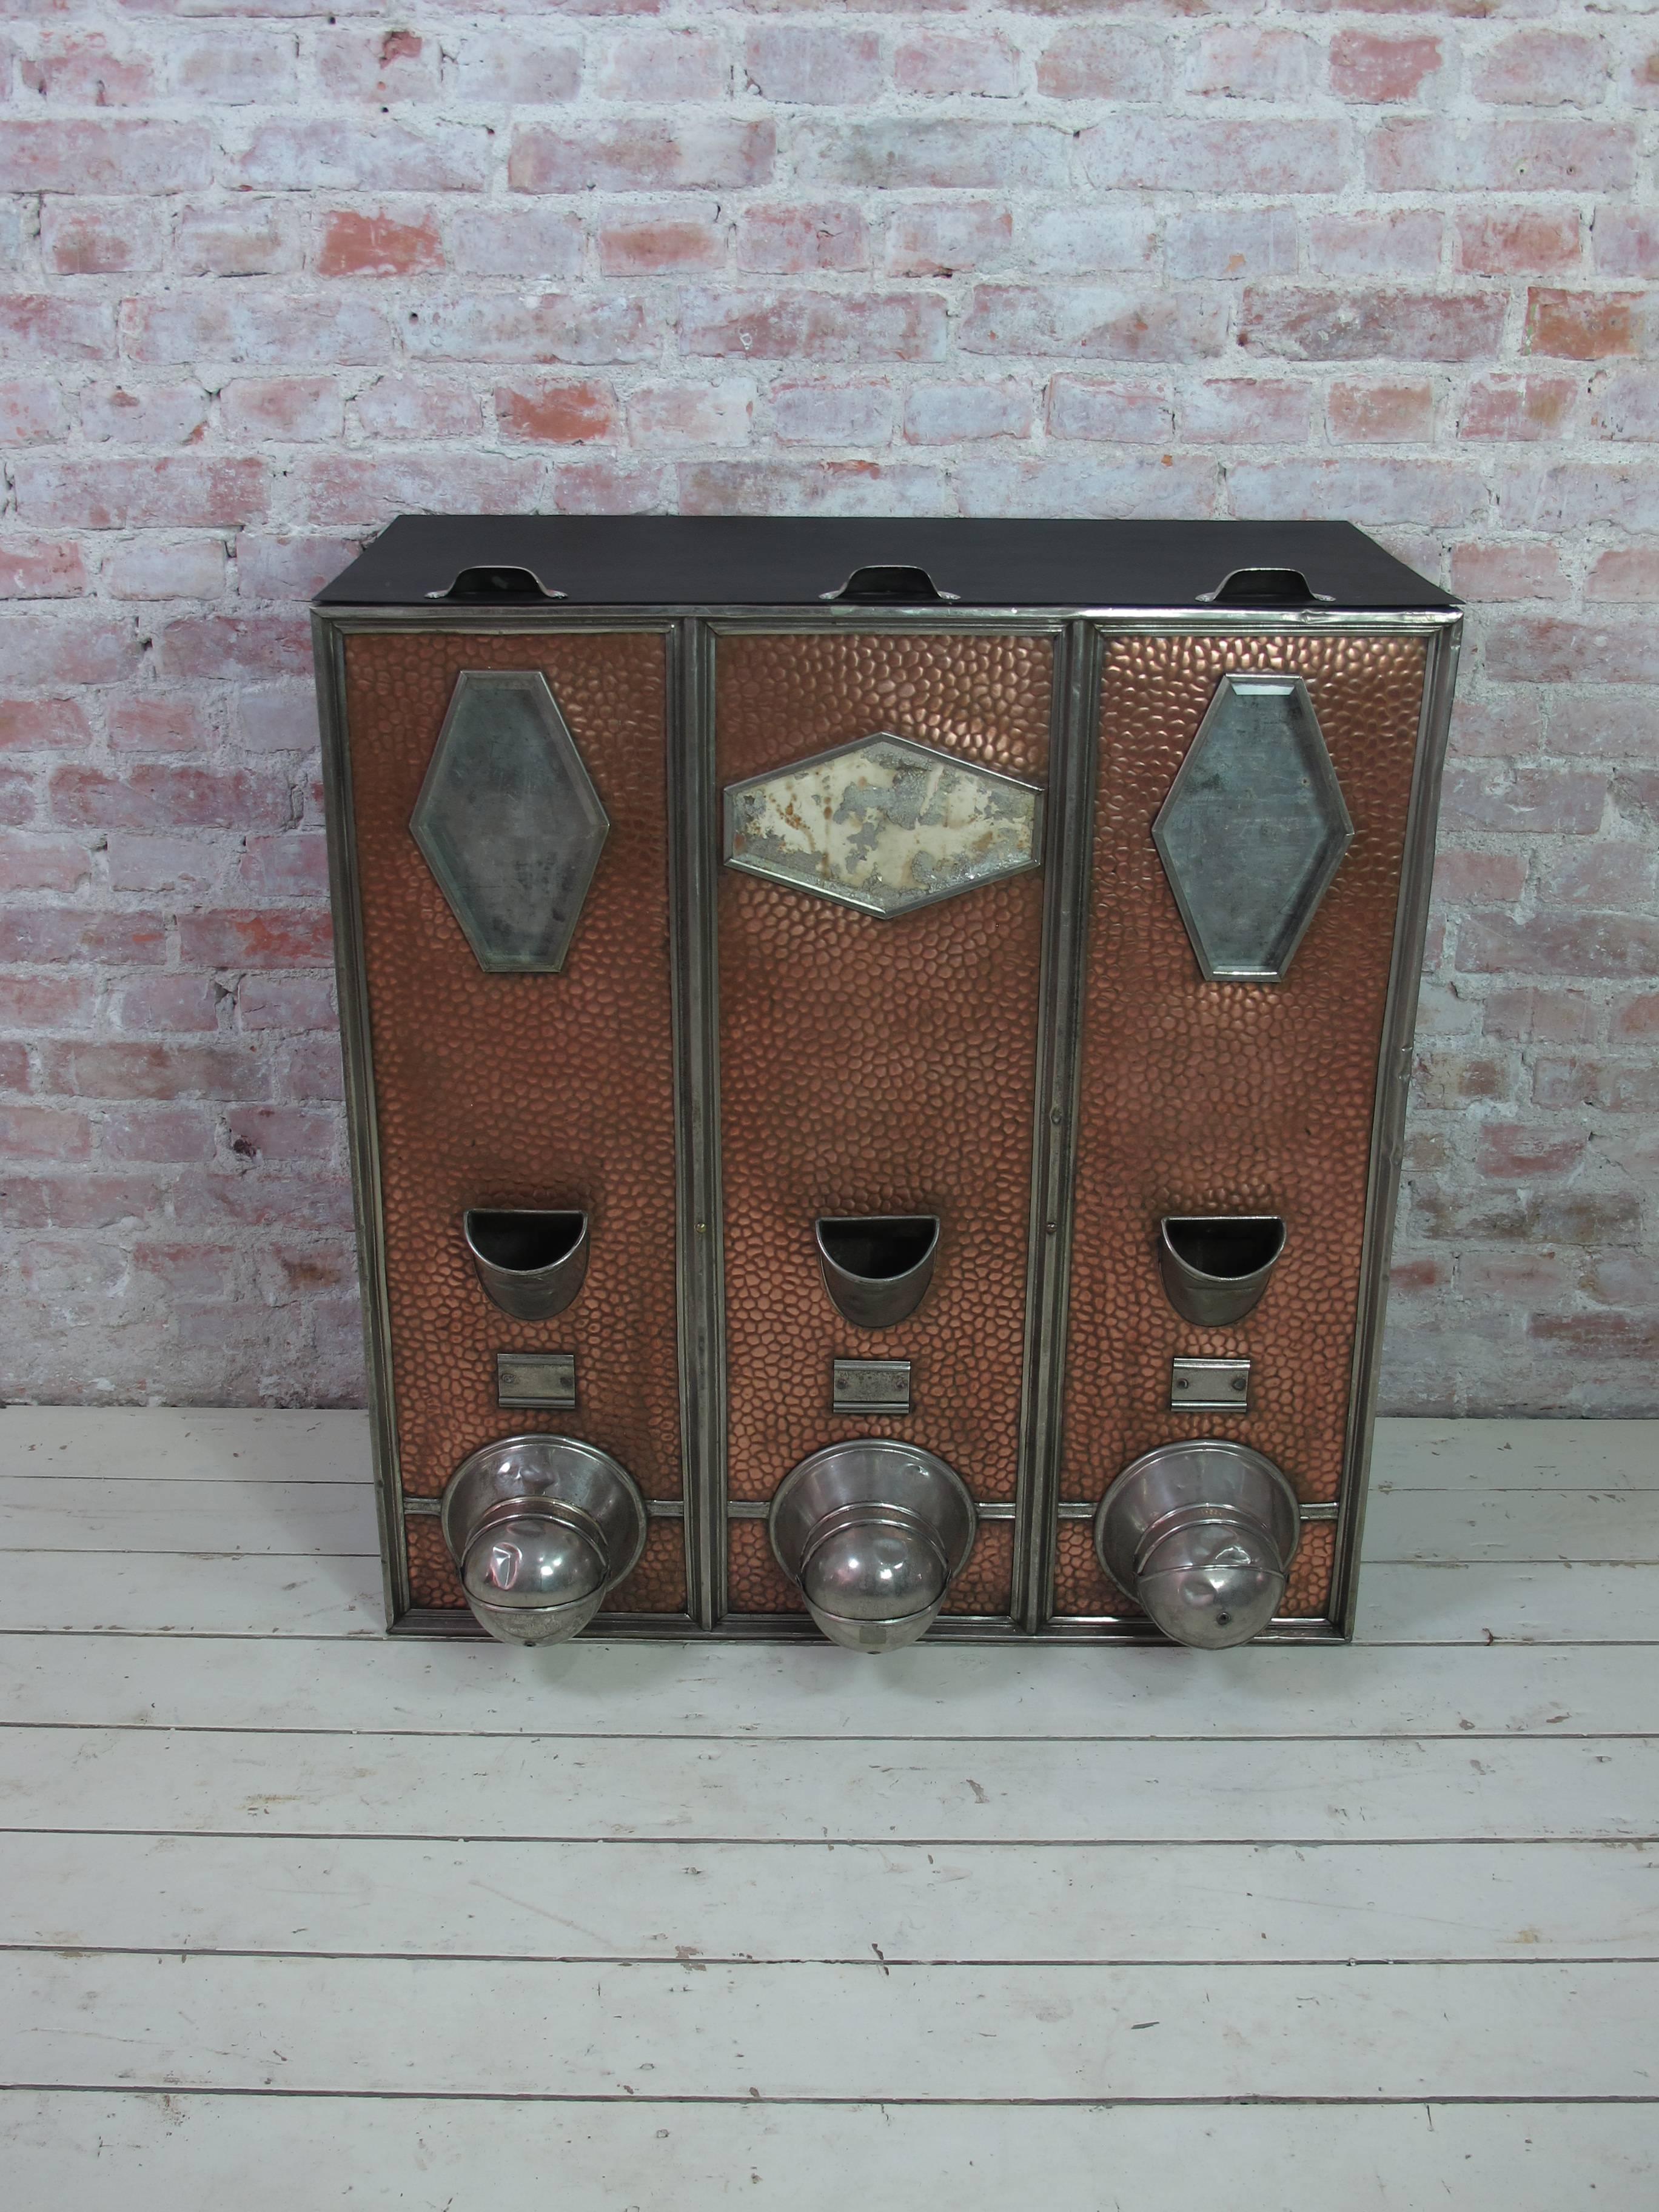 Copper and tin container for storage. The diamond shape faceted windows show the content.